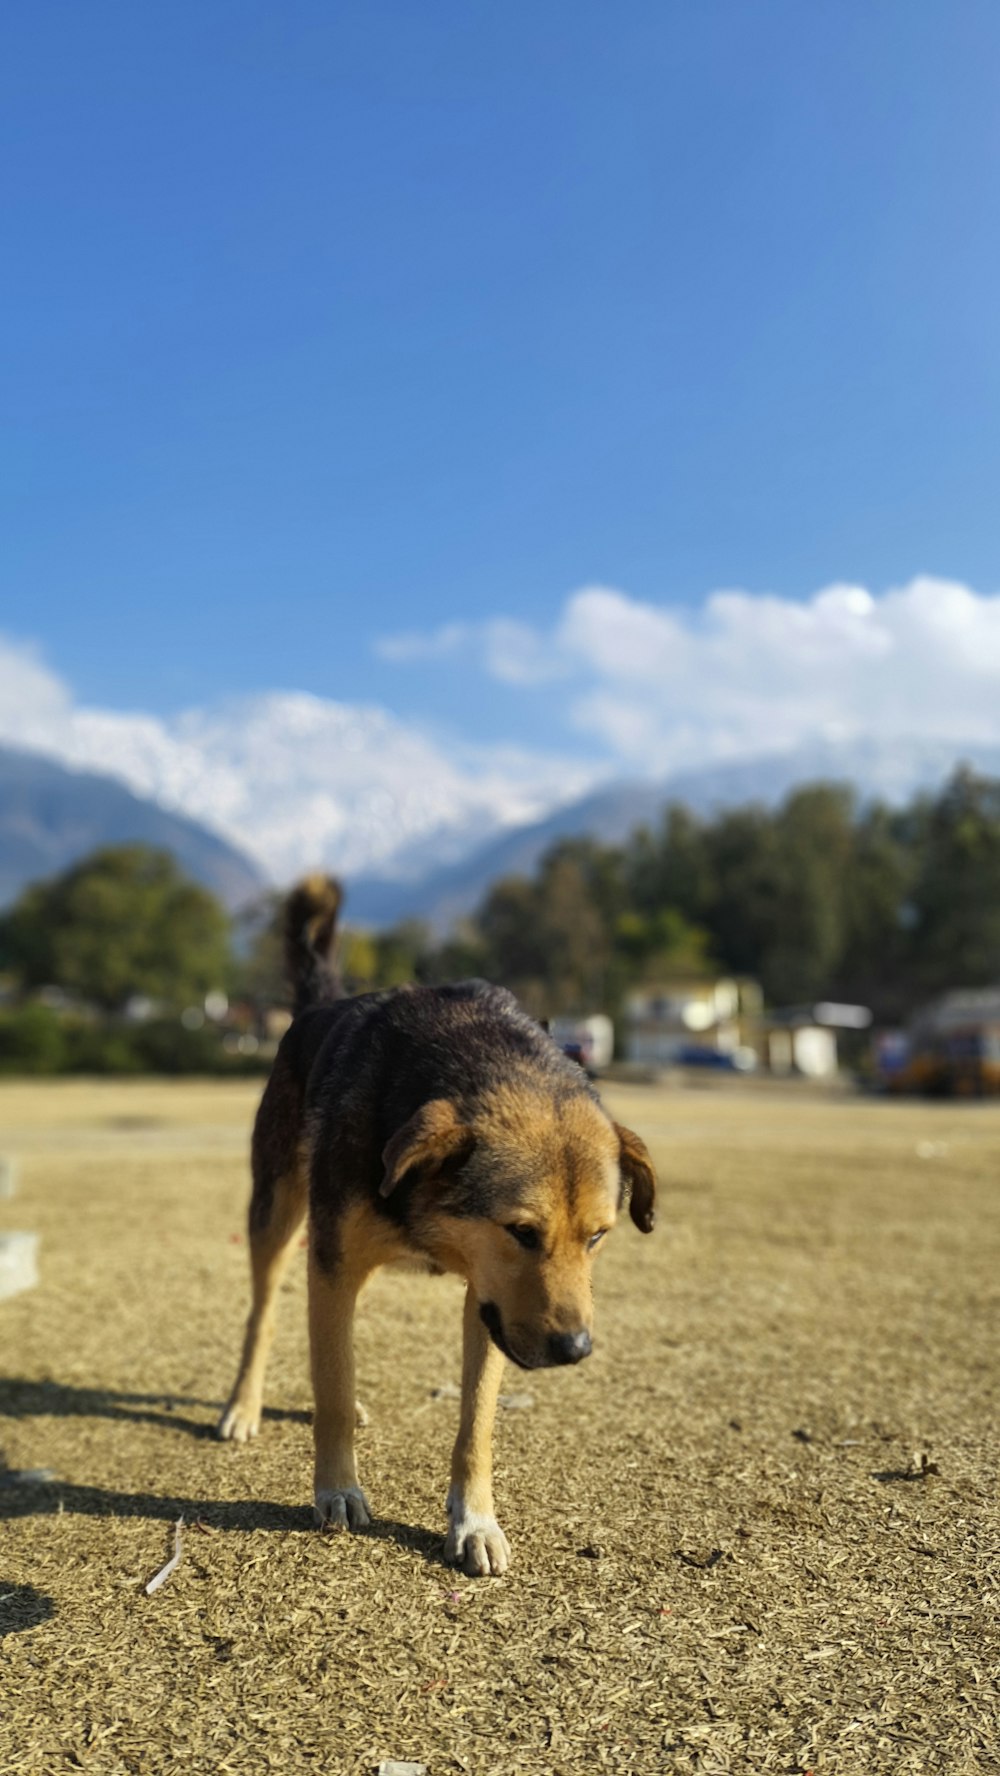 a dog walking across a dirt field with mountains in the background